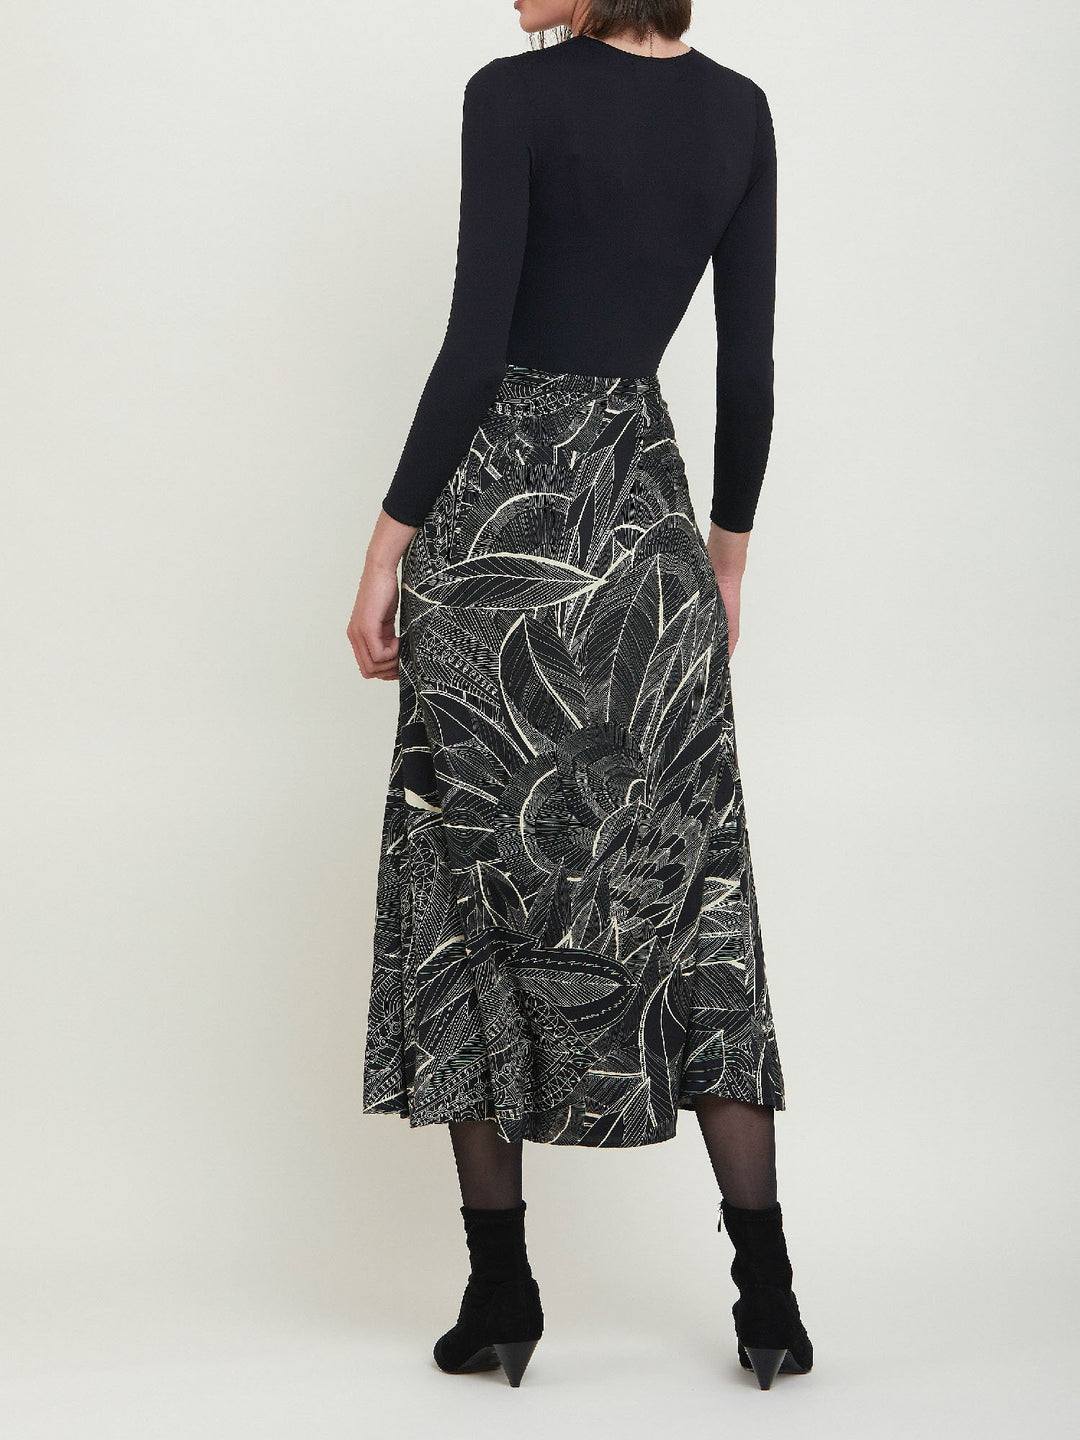 Riley, a simple slip skirt. Crafted in a fluid viscose fabric in an abstract botanical cream on black print. This Hip skimming silhouette flares below the knee & falls to the mid-calf. Helen proposes to style with a cozy sweater or dress up with a timeless black body.